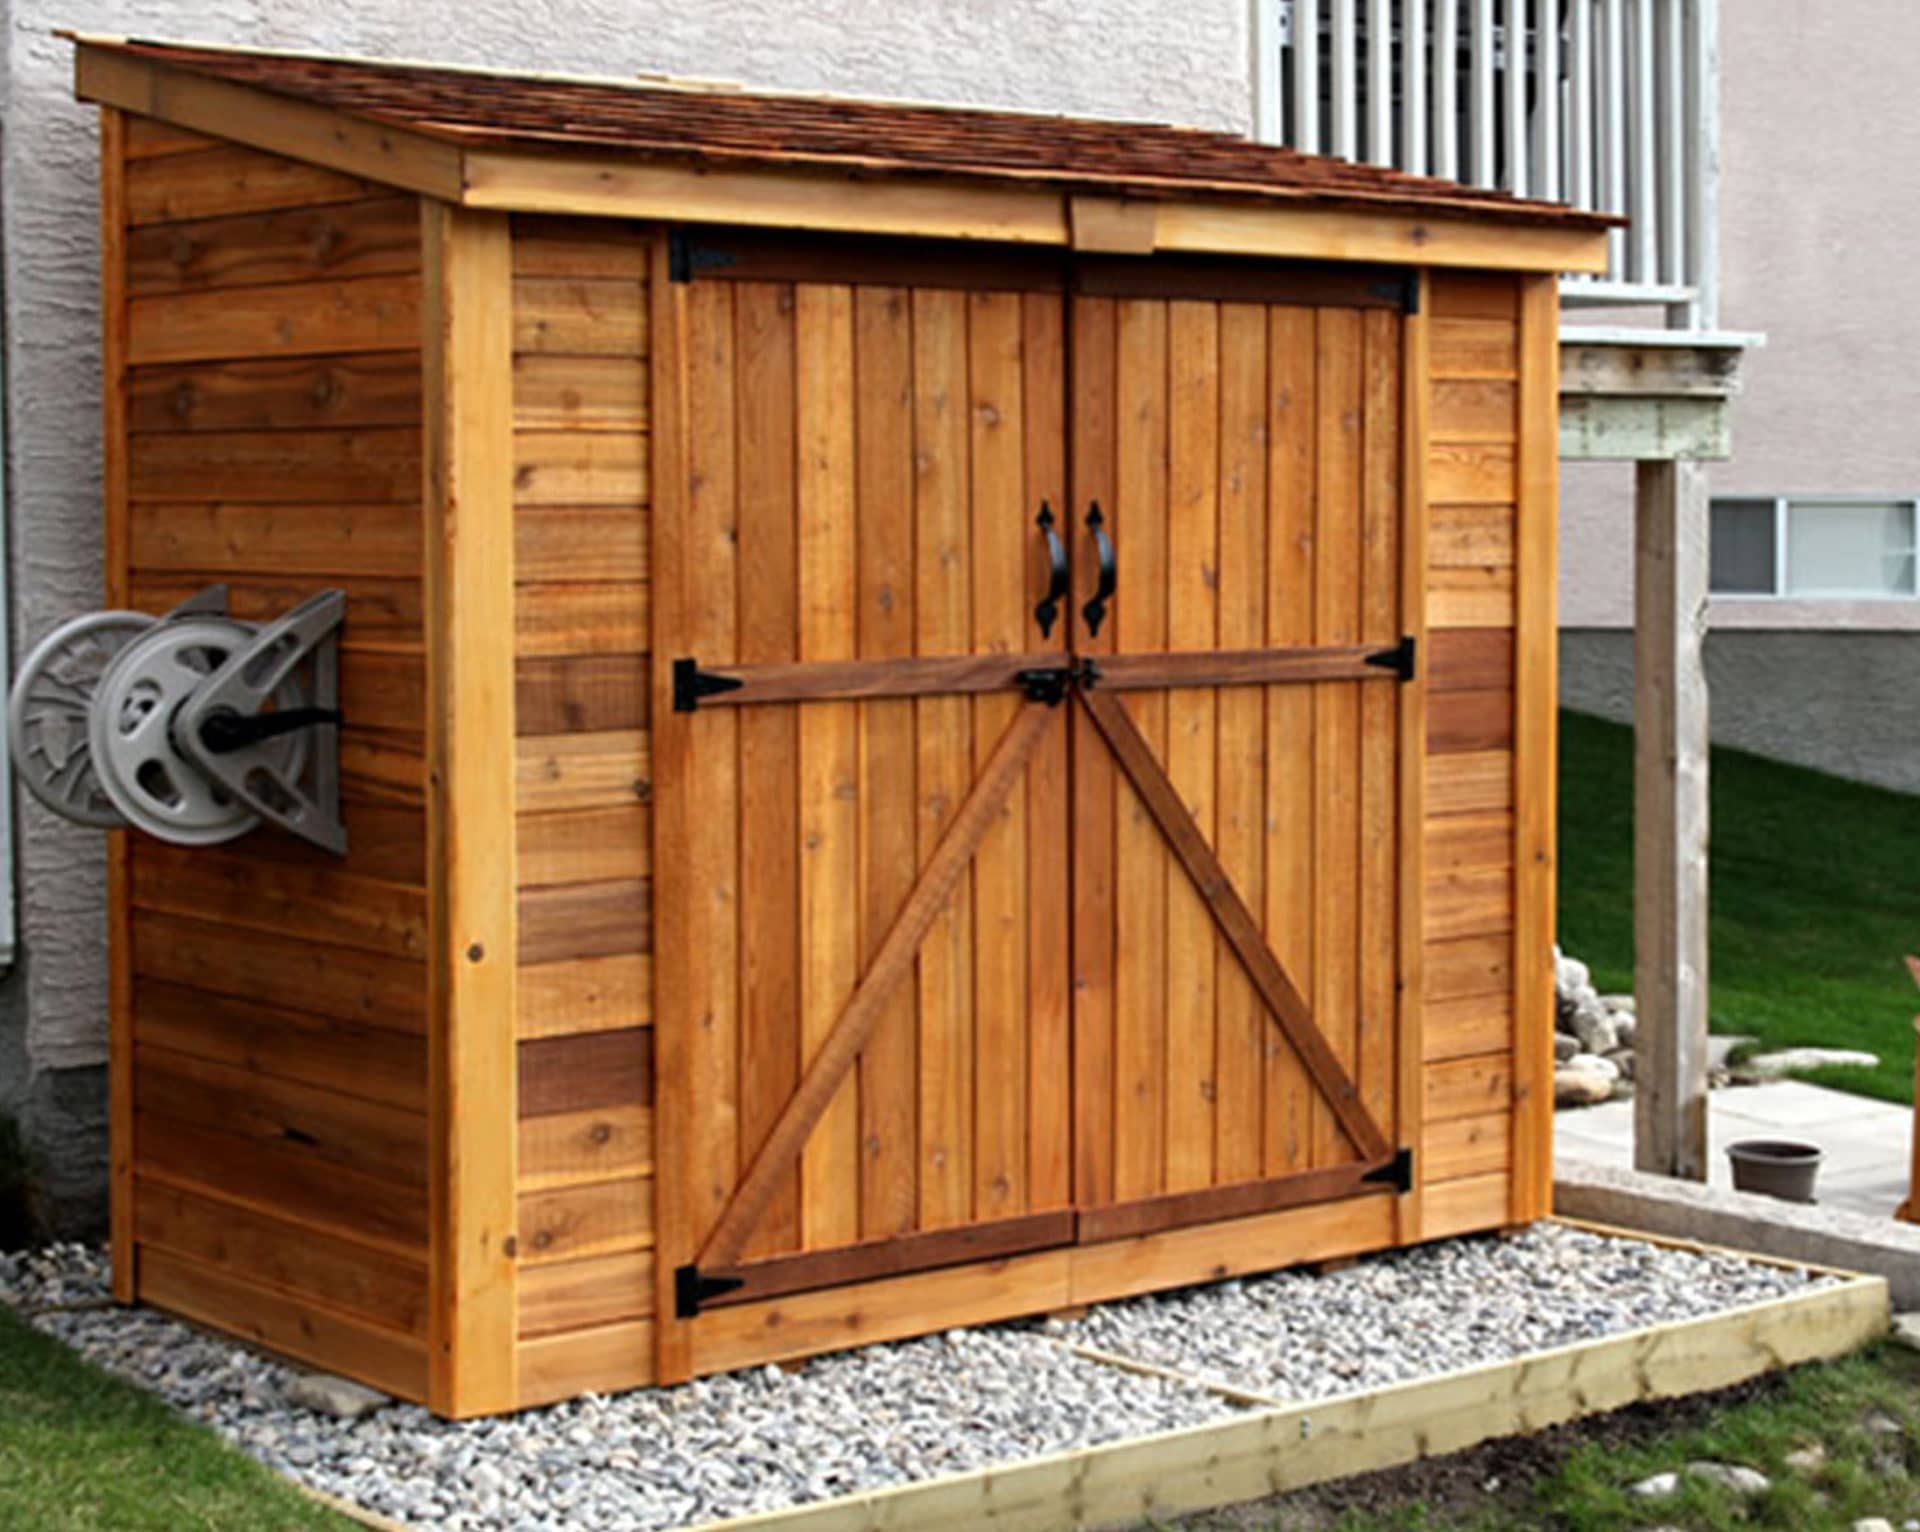 Lean to Shed SpaceSaver 8x4 - Double Doors - Outdoor 